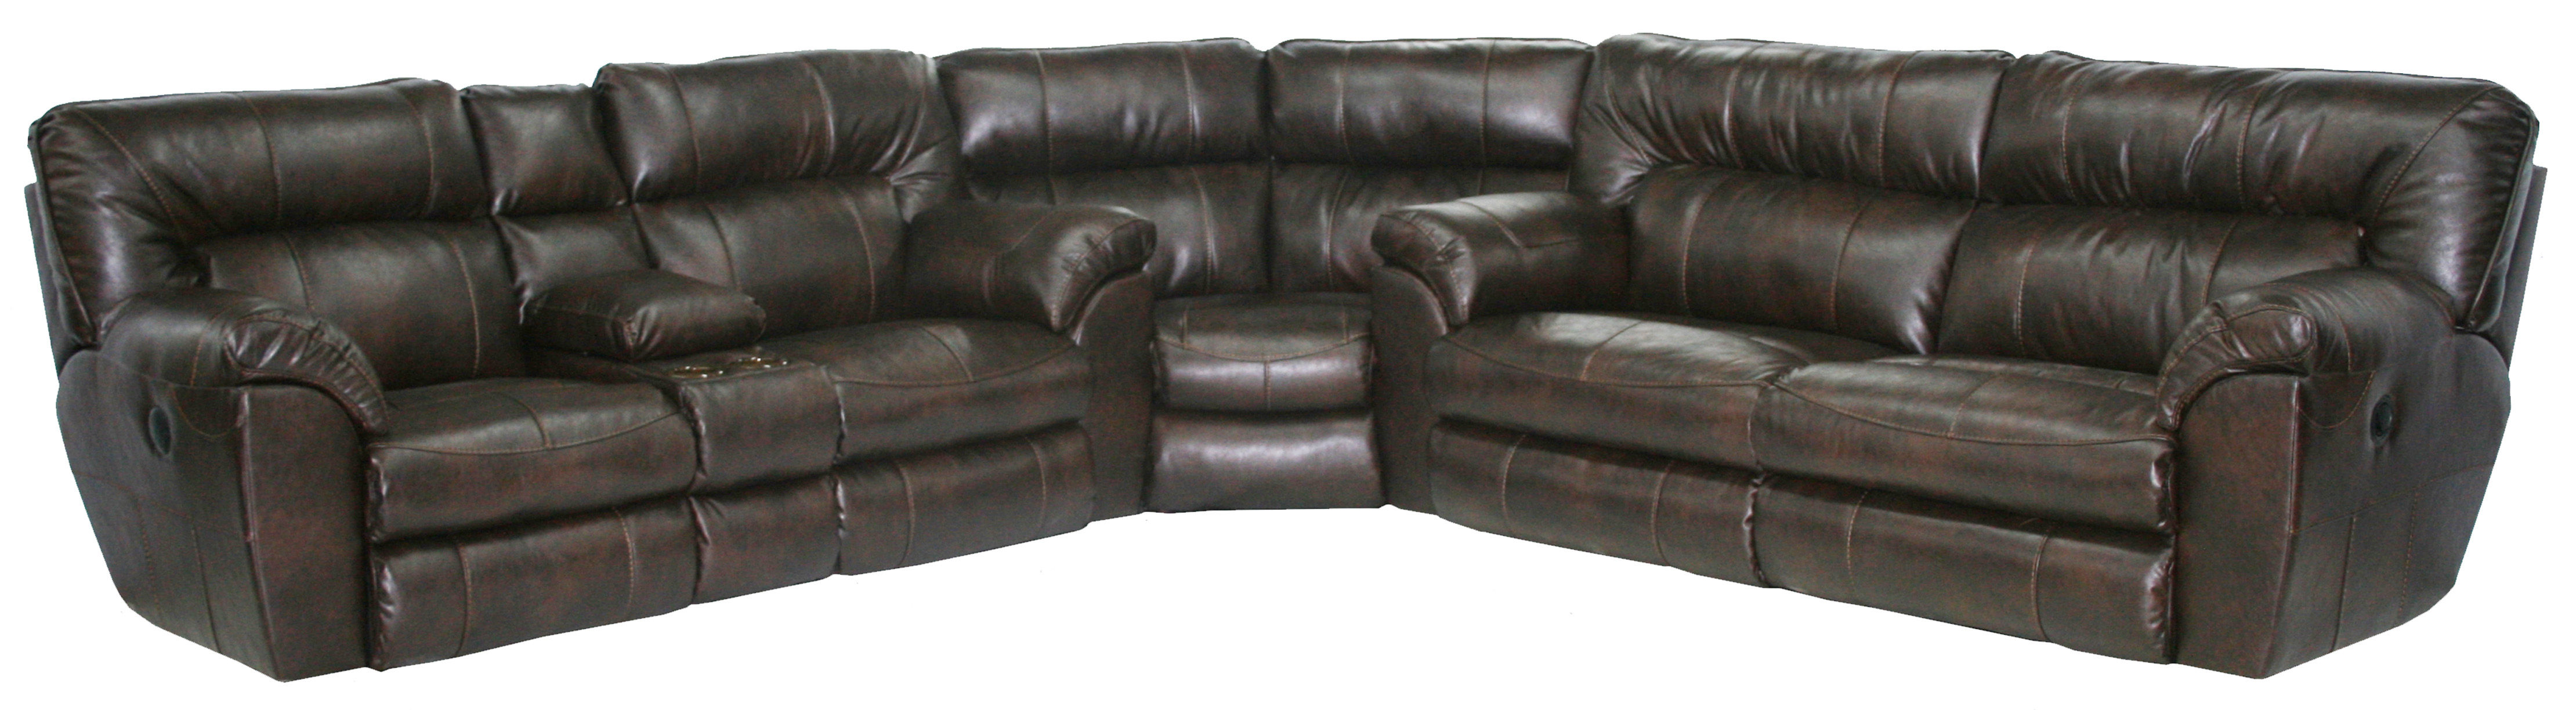 Nolan Reclining Sectional Extra Wide, Extra Long Leather Sectional Couch